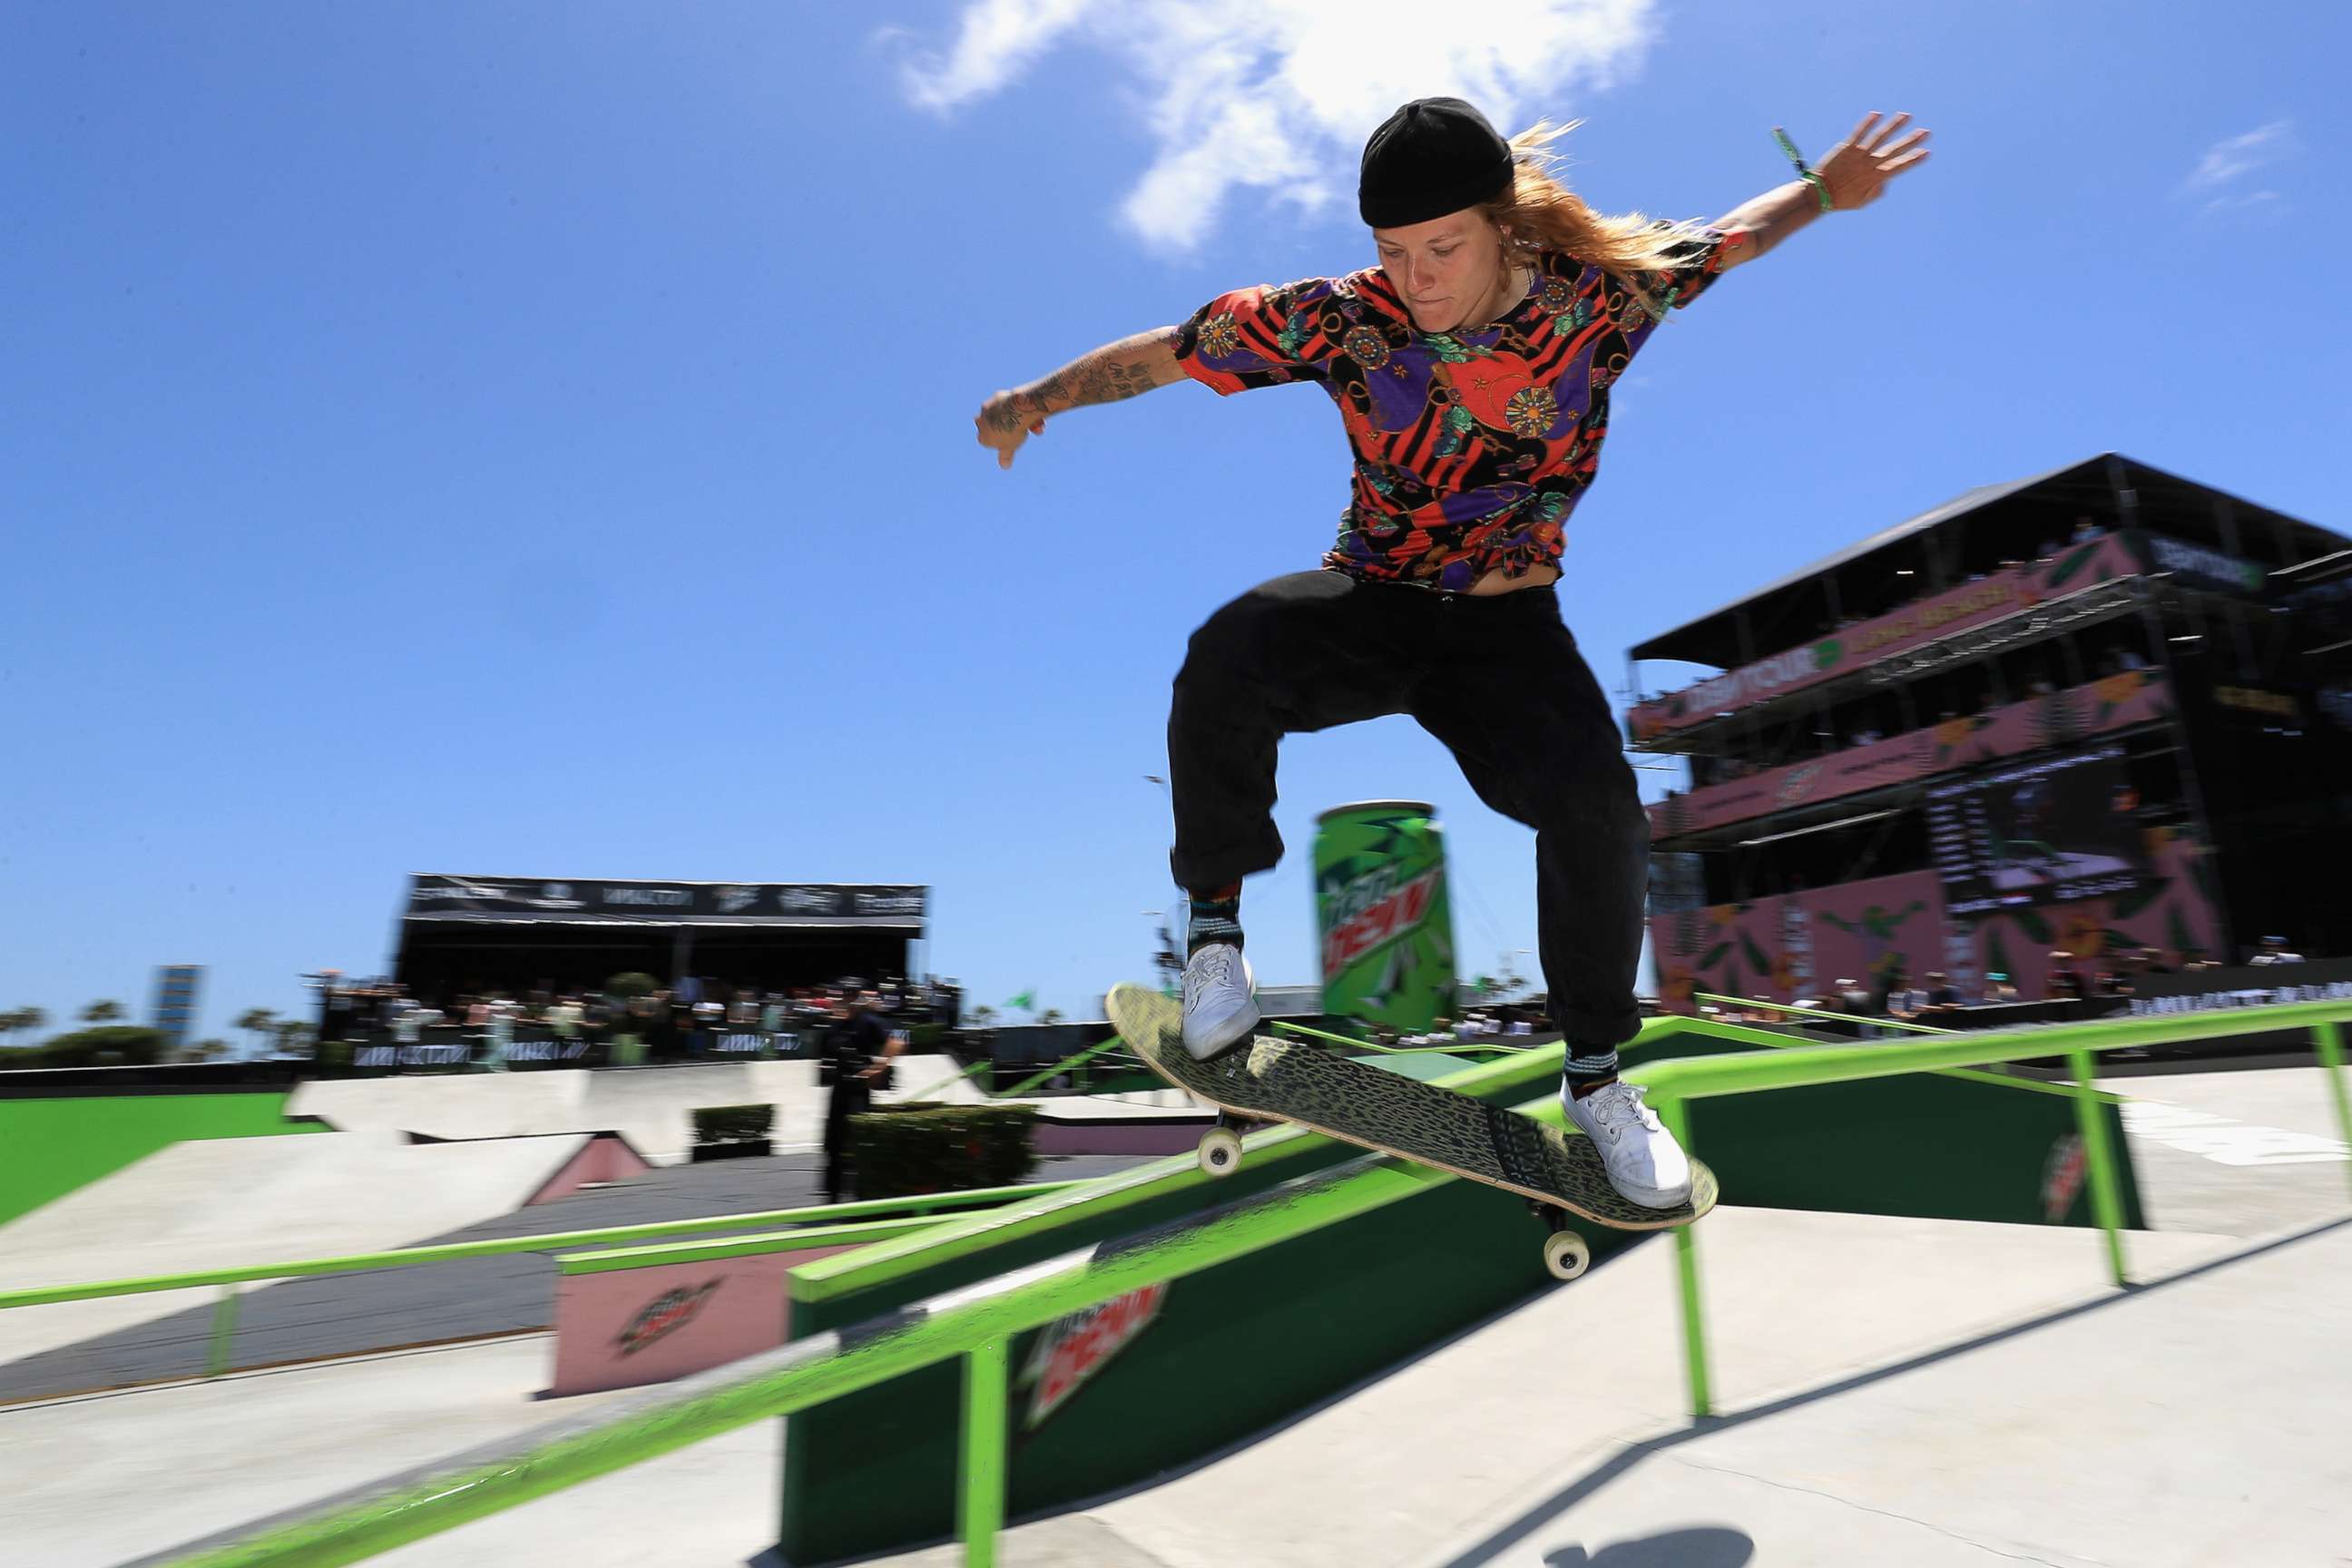 PHOTO: Candy Jacobs of Netherlands competes in the Women's Pro Street Final at the 2018 Dew Tour on June 30, 2018 in Long Beach, Calif.